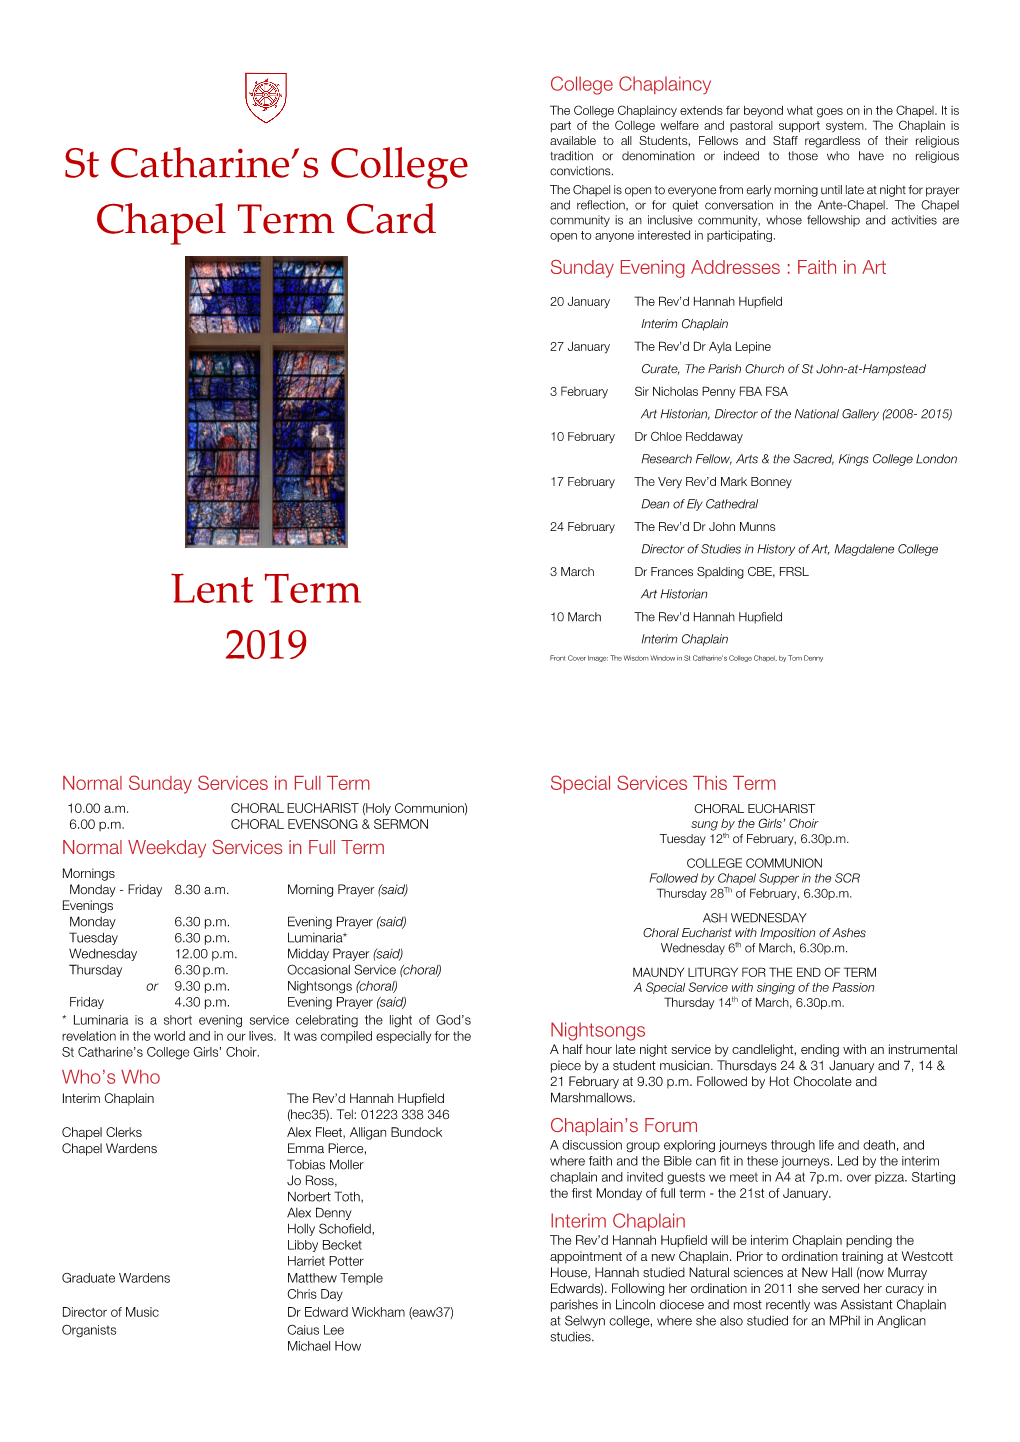 Term Card Lent 2019 Small Image